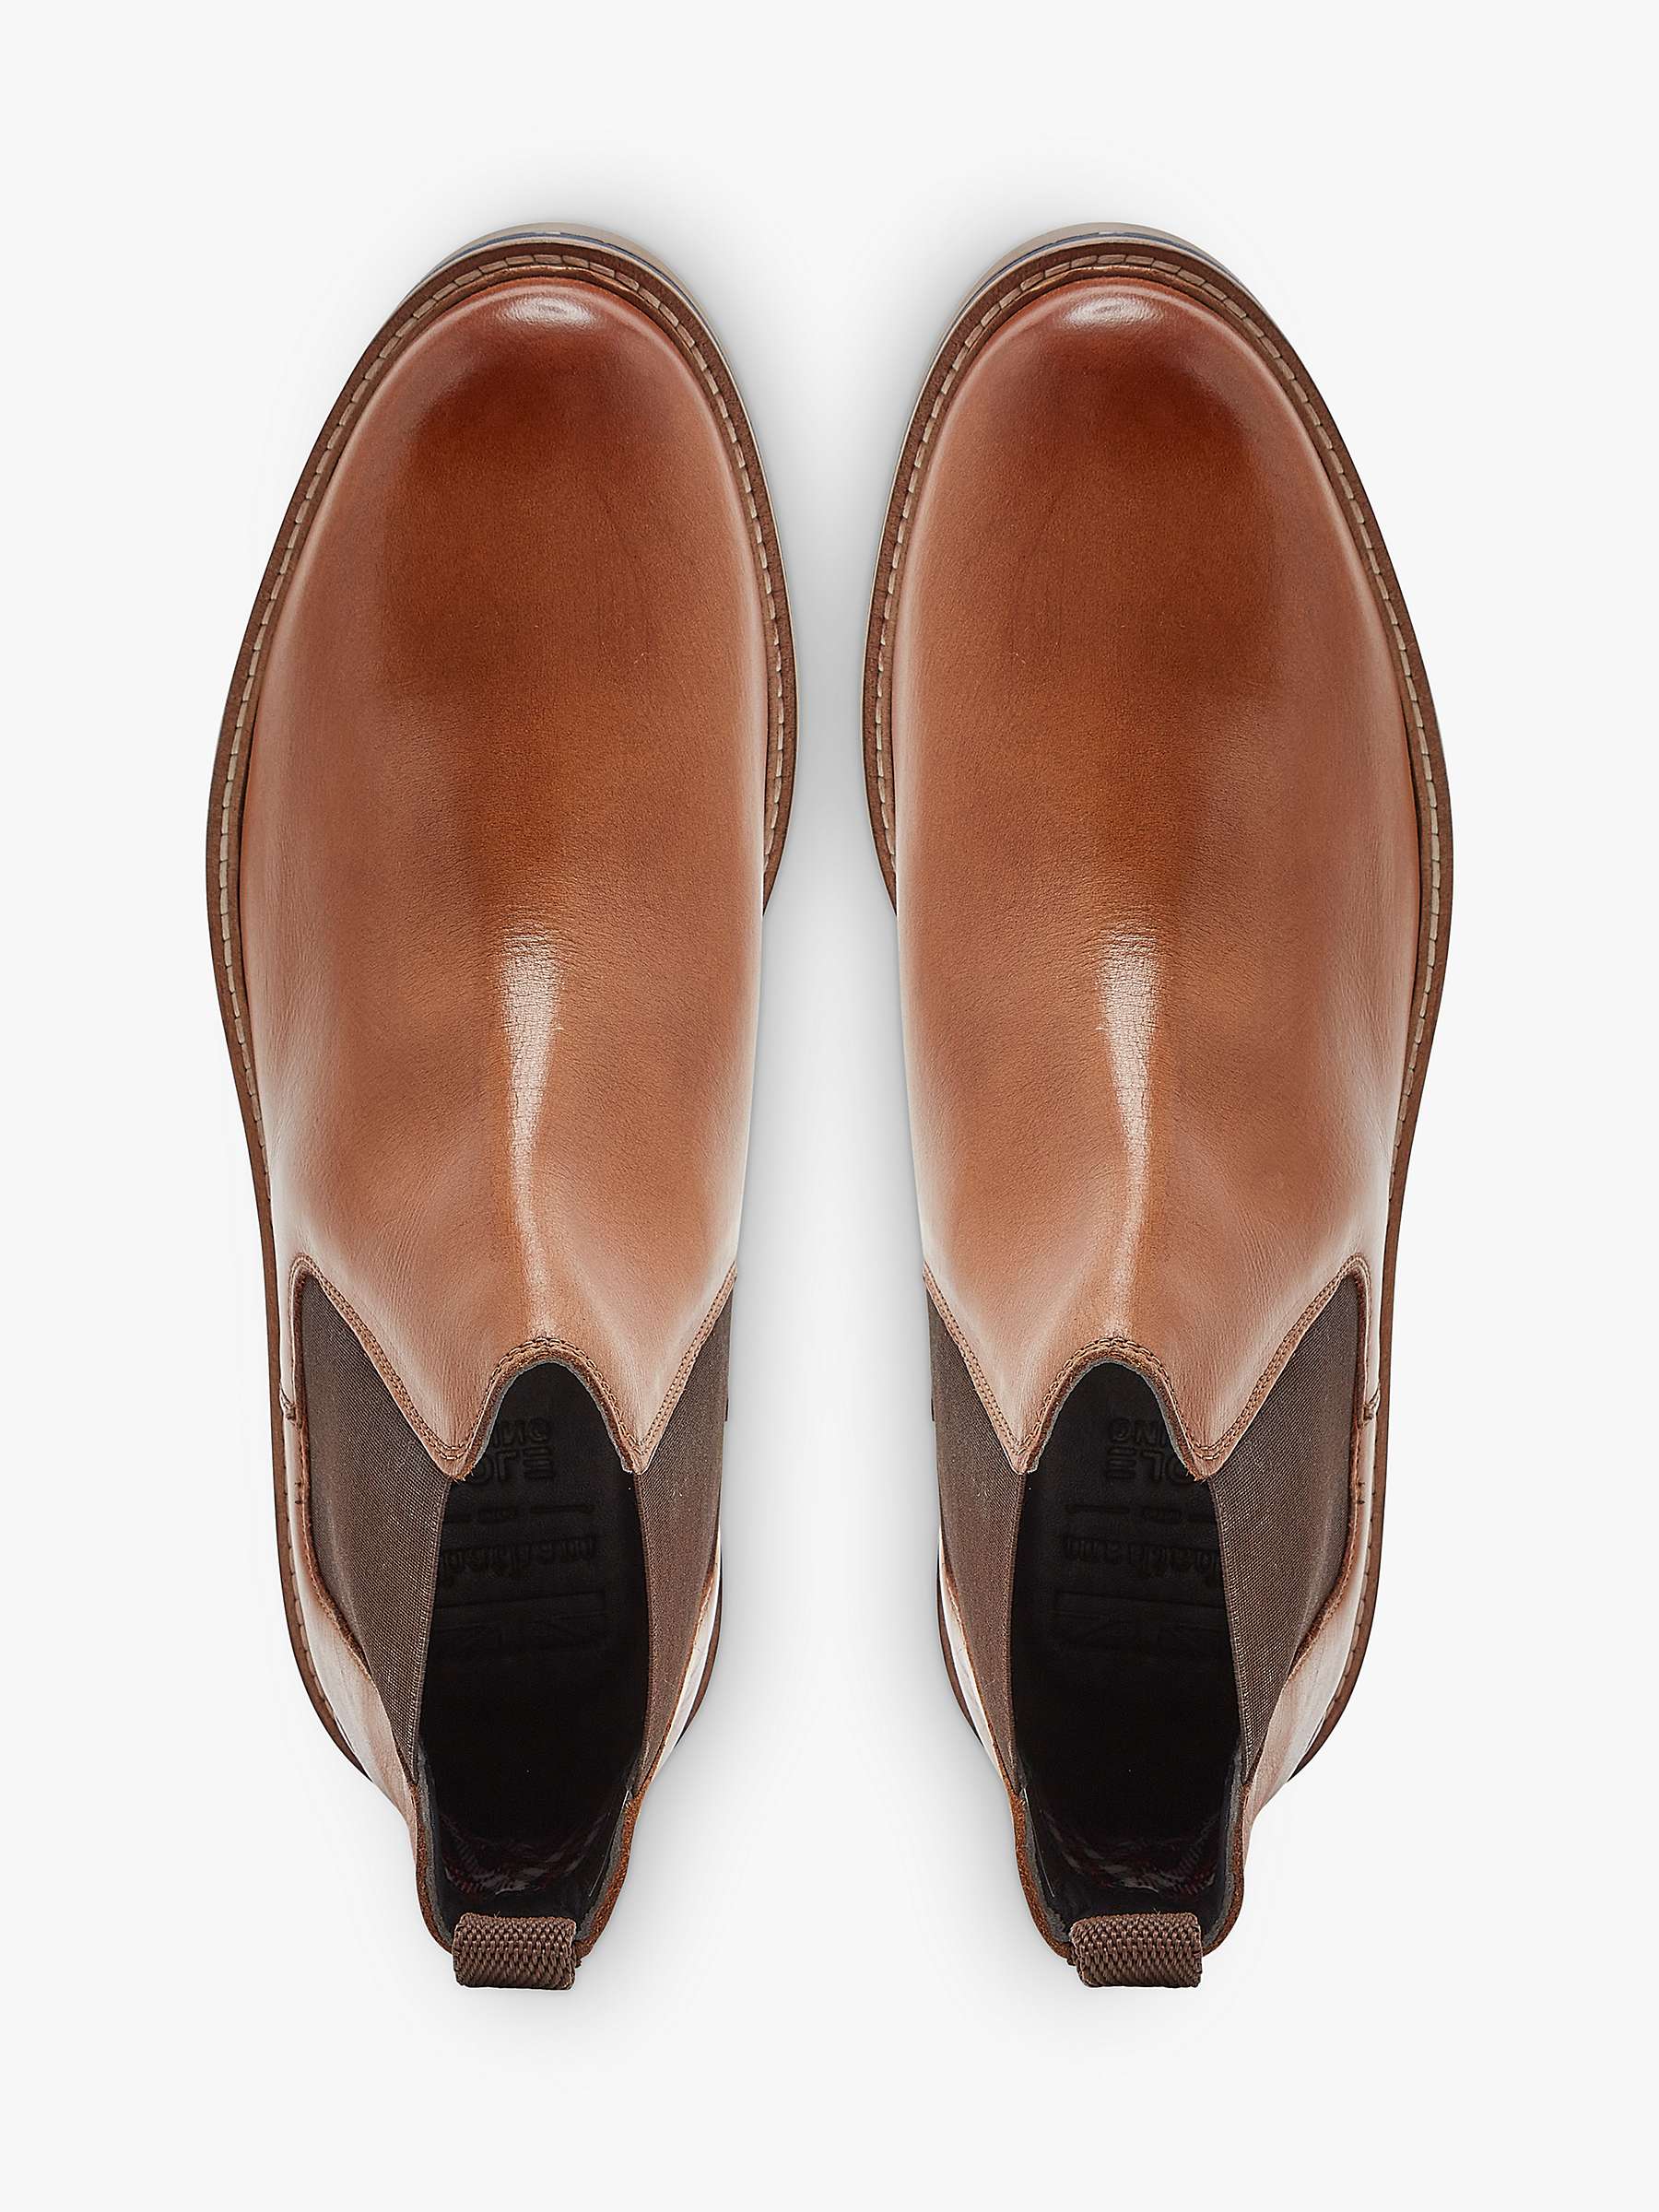 Buy Chatham Scaffell Leather Chukka Boots, Tan Online at johnlewis.com